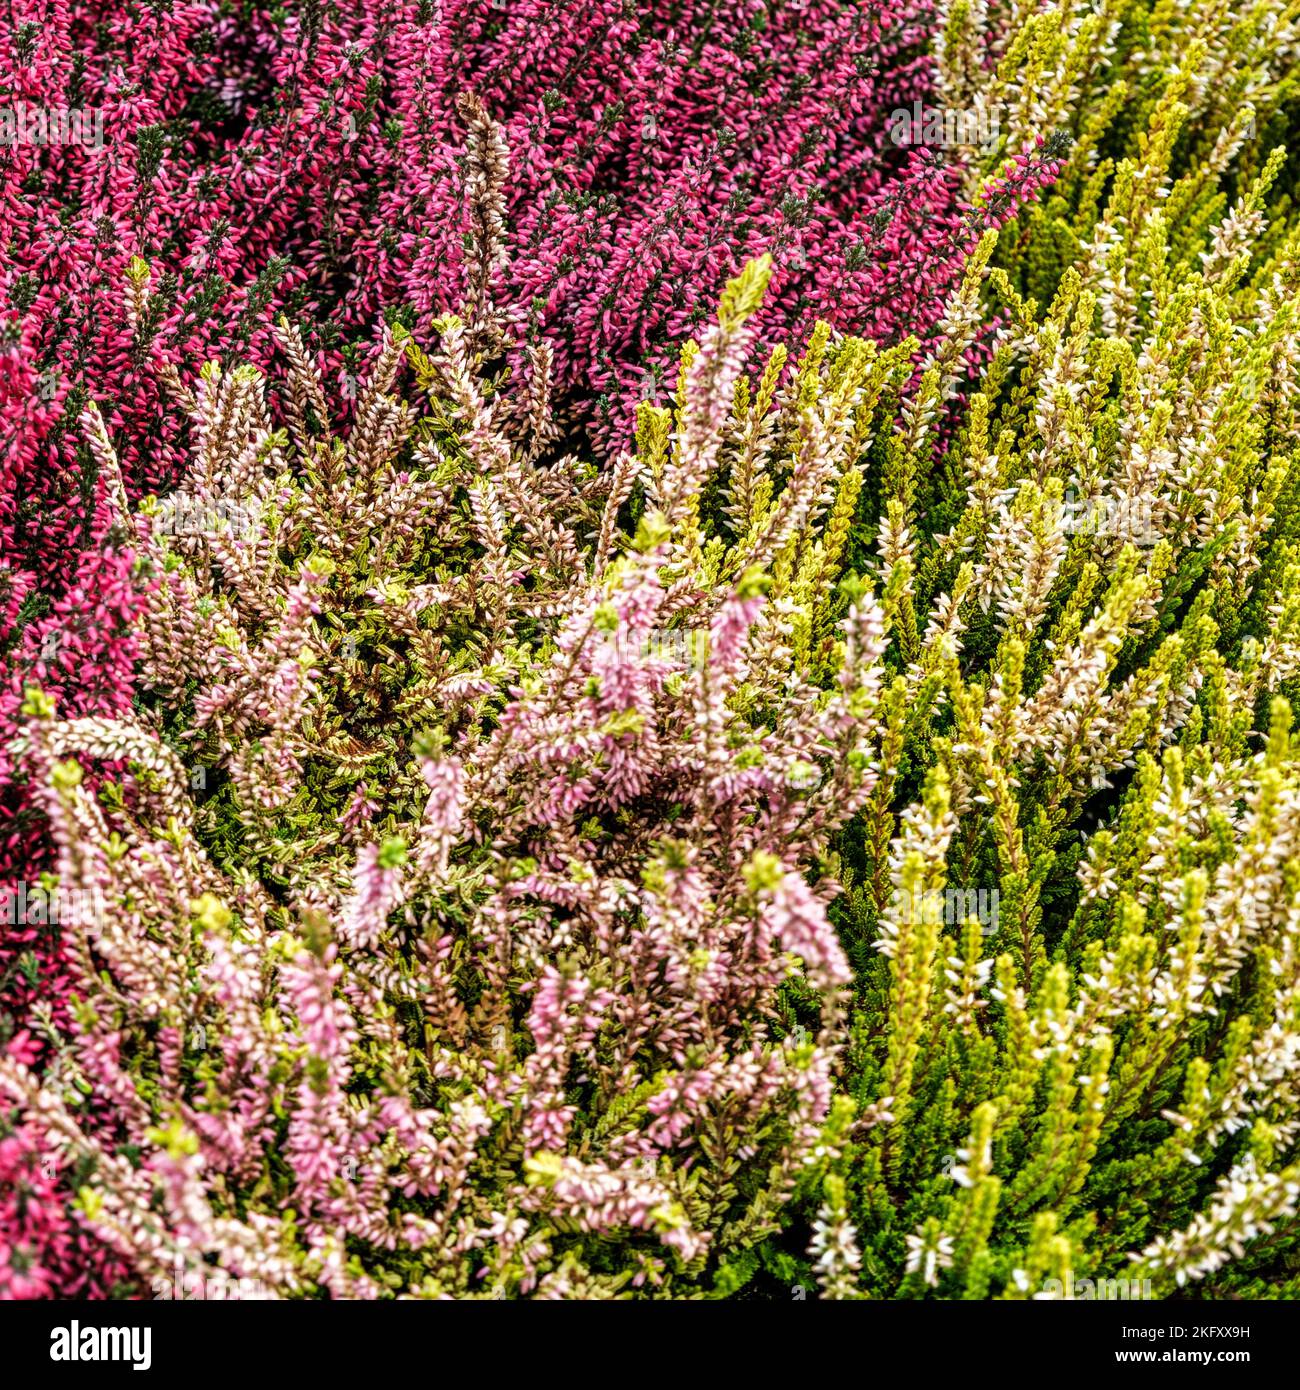 Epsom, Surrey, London UK, November 19 2022, Display Of Mixed Colourful Hardy Heather Plants Close UP With No People Stock Photo